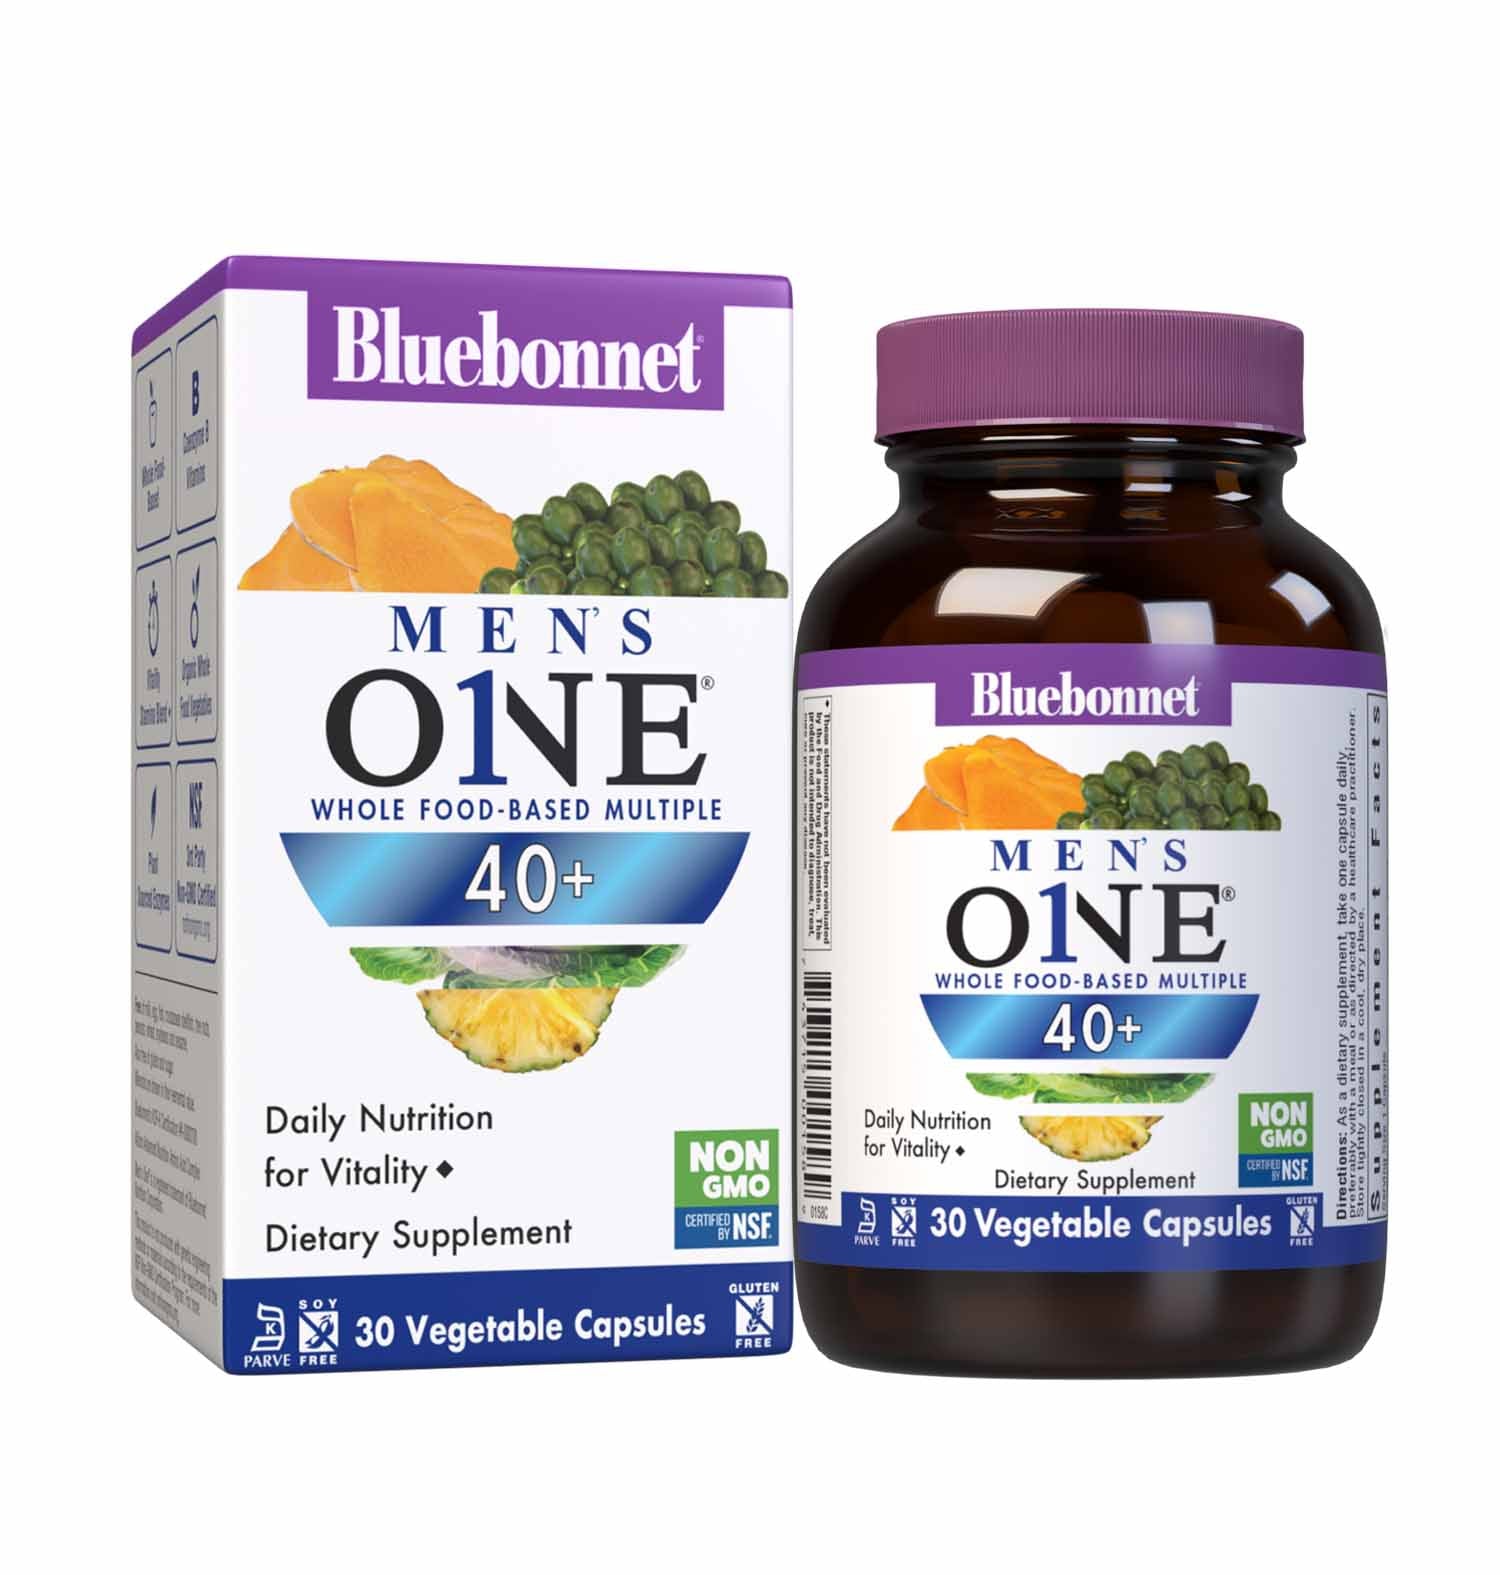 Bluebonnet’s Men’s ONE 40+ Whole Food-Based Multiple 30 Vegetable Capsules are formulated for daily nutritional support and vitality for men over 40, helping to increase energy and vitality, aid joint comfort, maintain prostate health, and support heart health. Bottle with box. #size_30 count